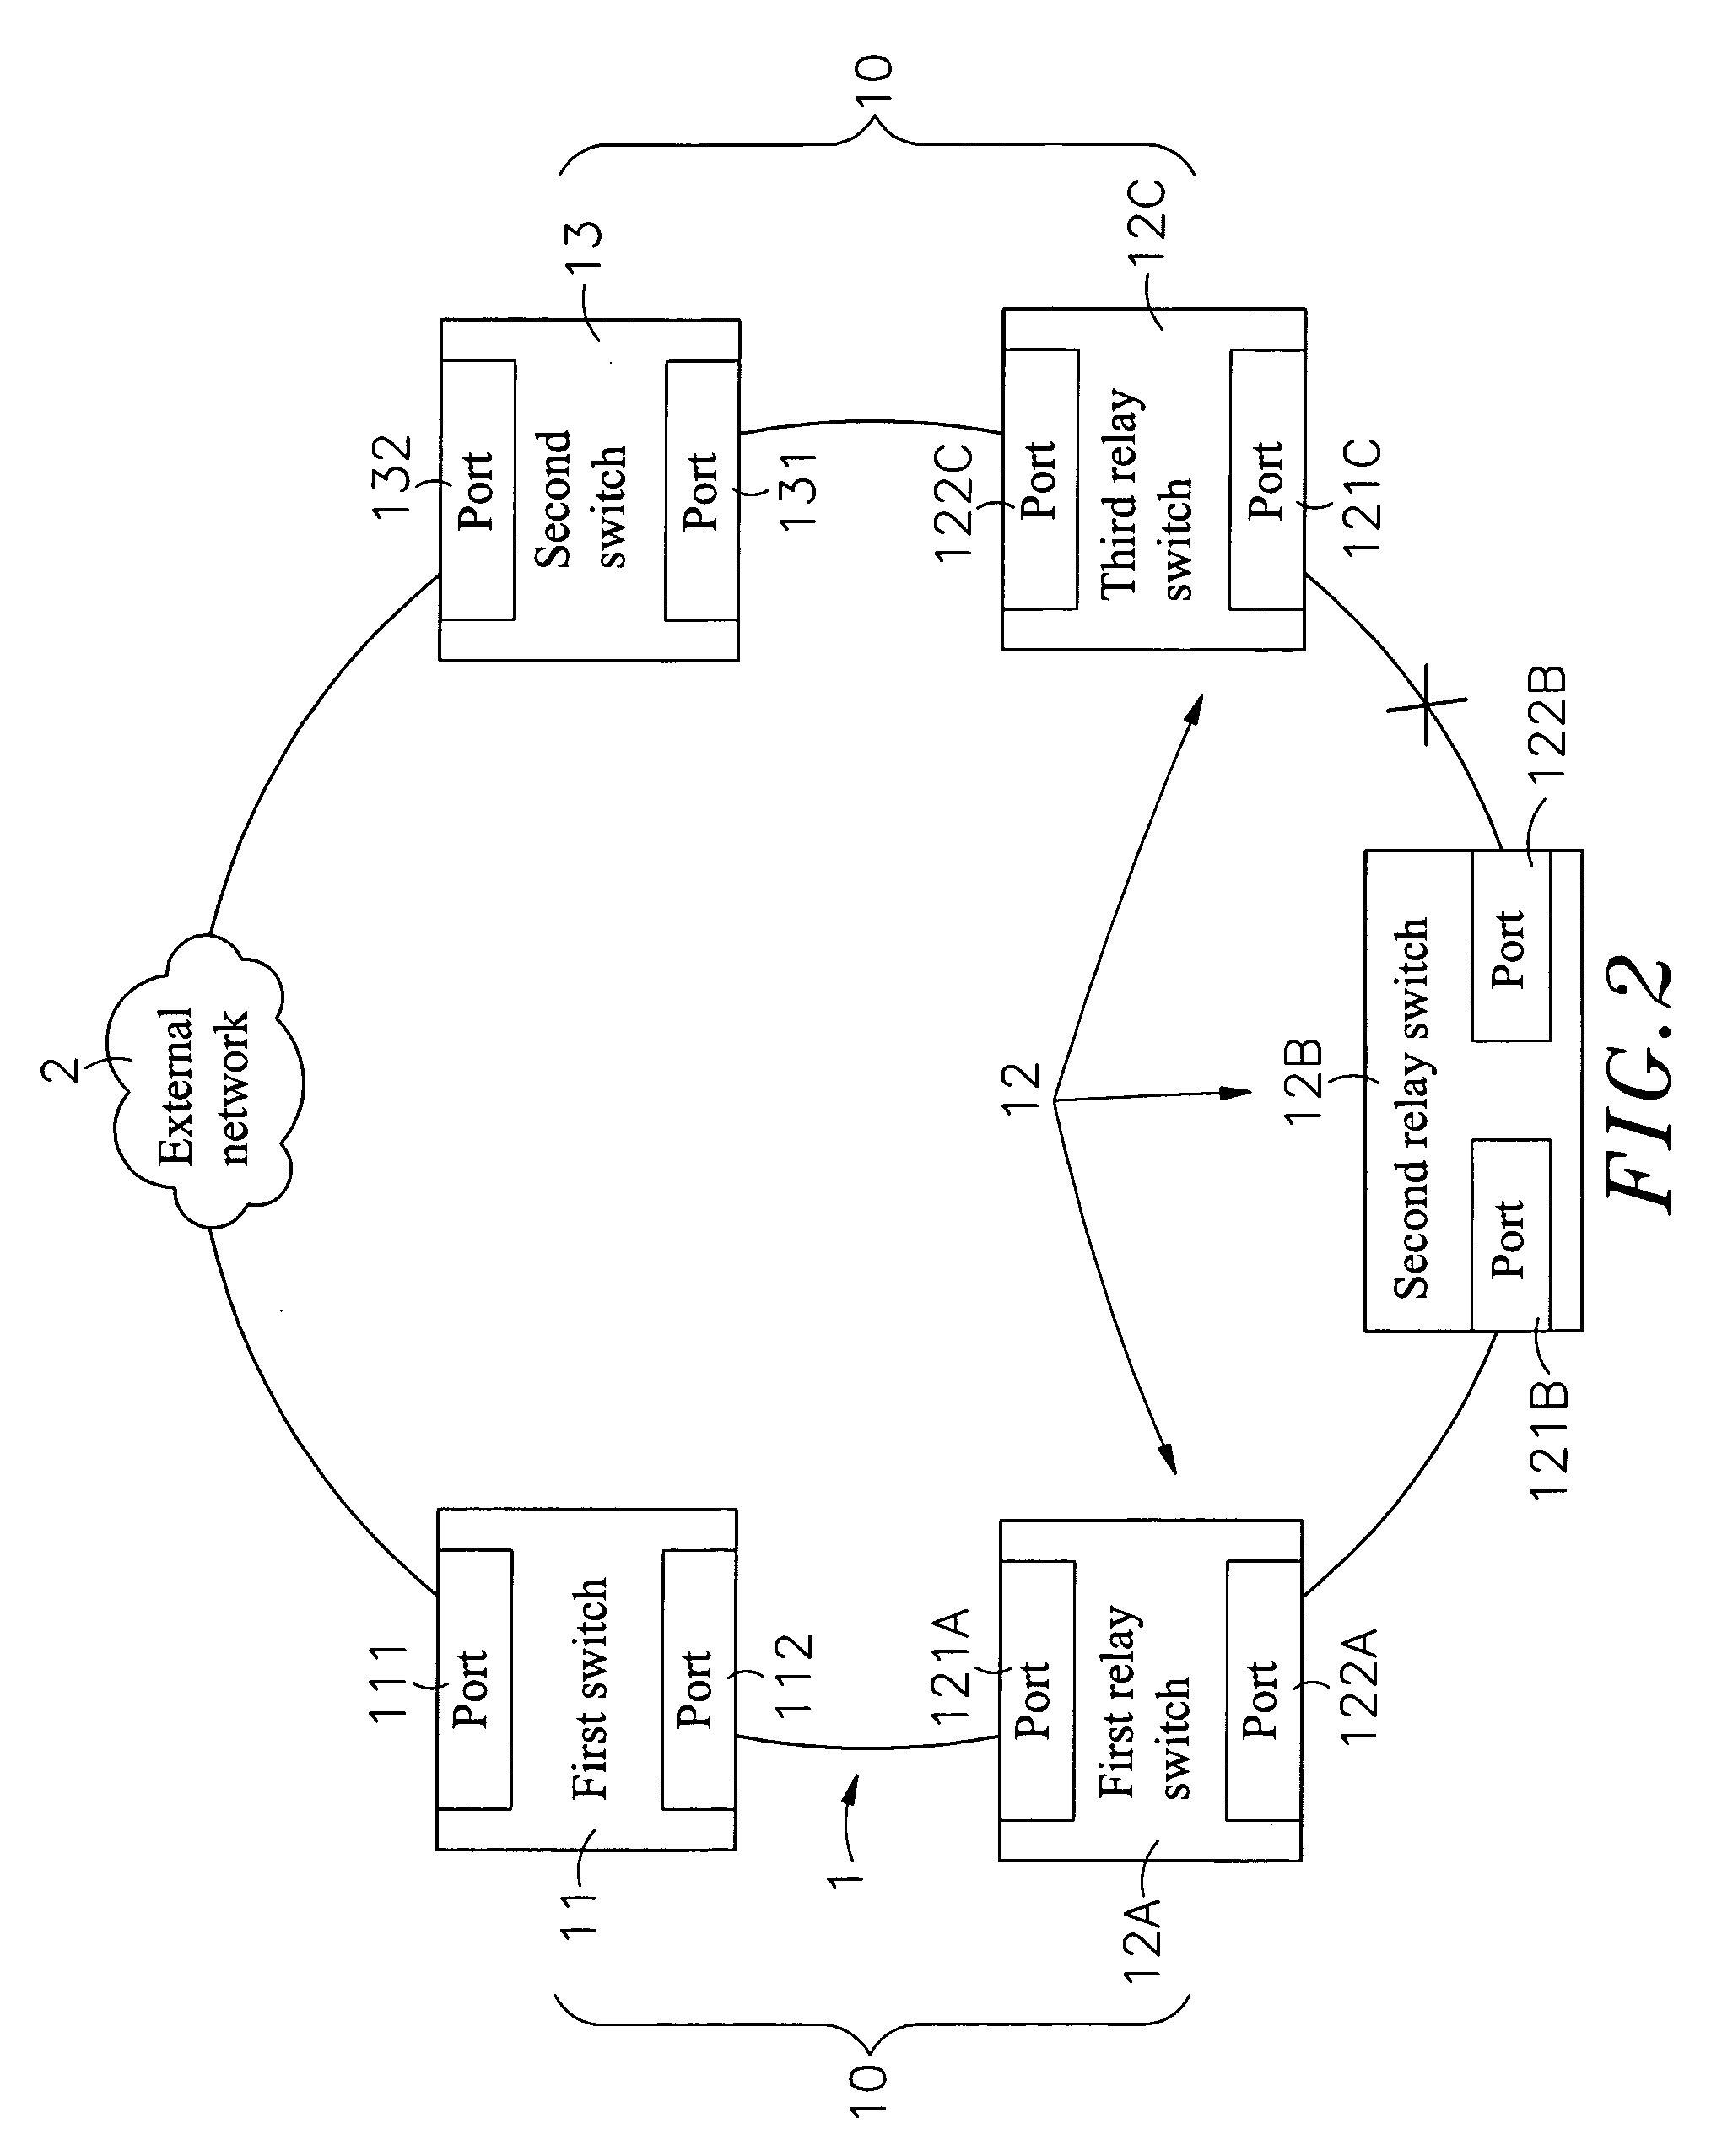 Method for Conducting Redundancy Checks in a Chain Network